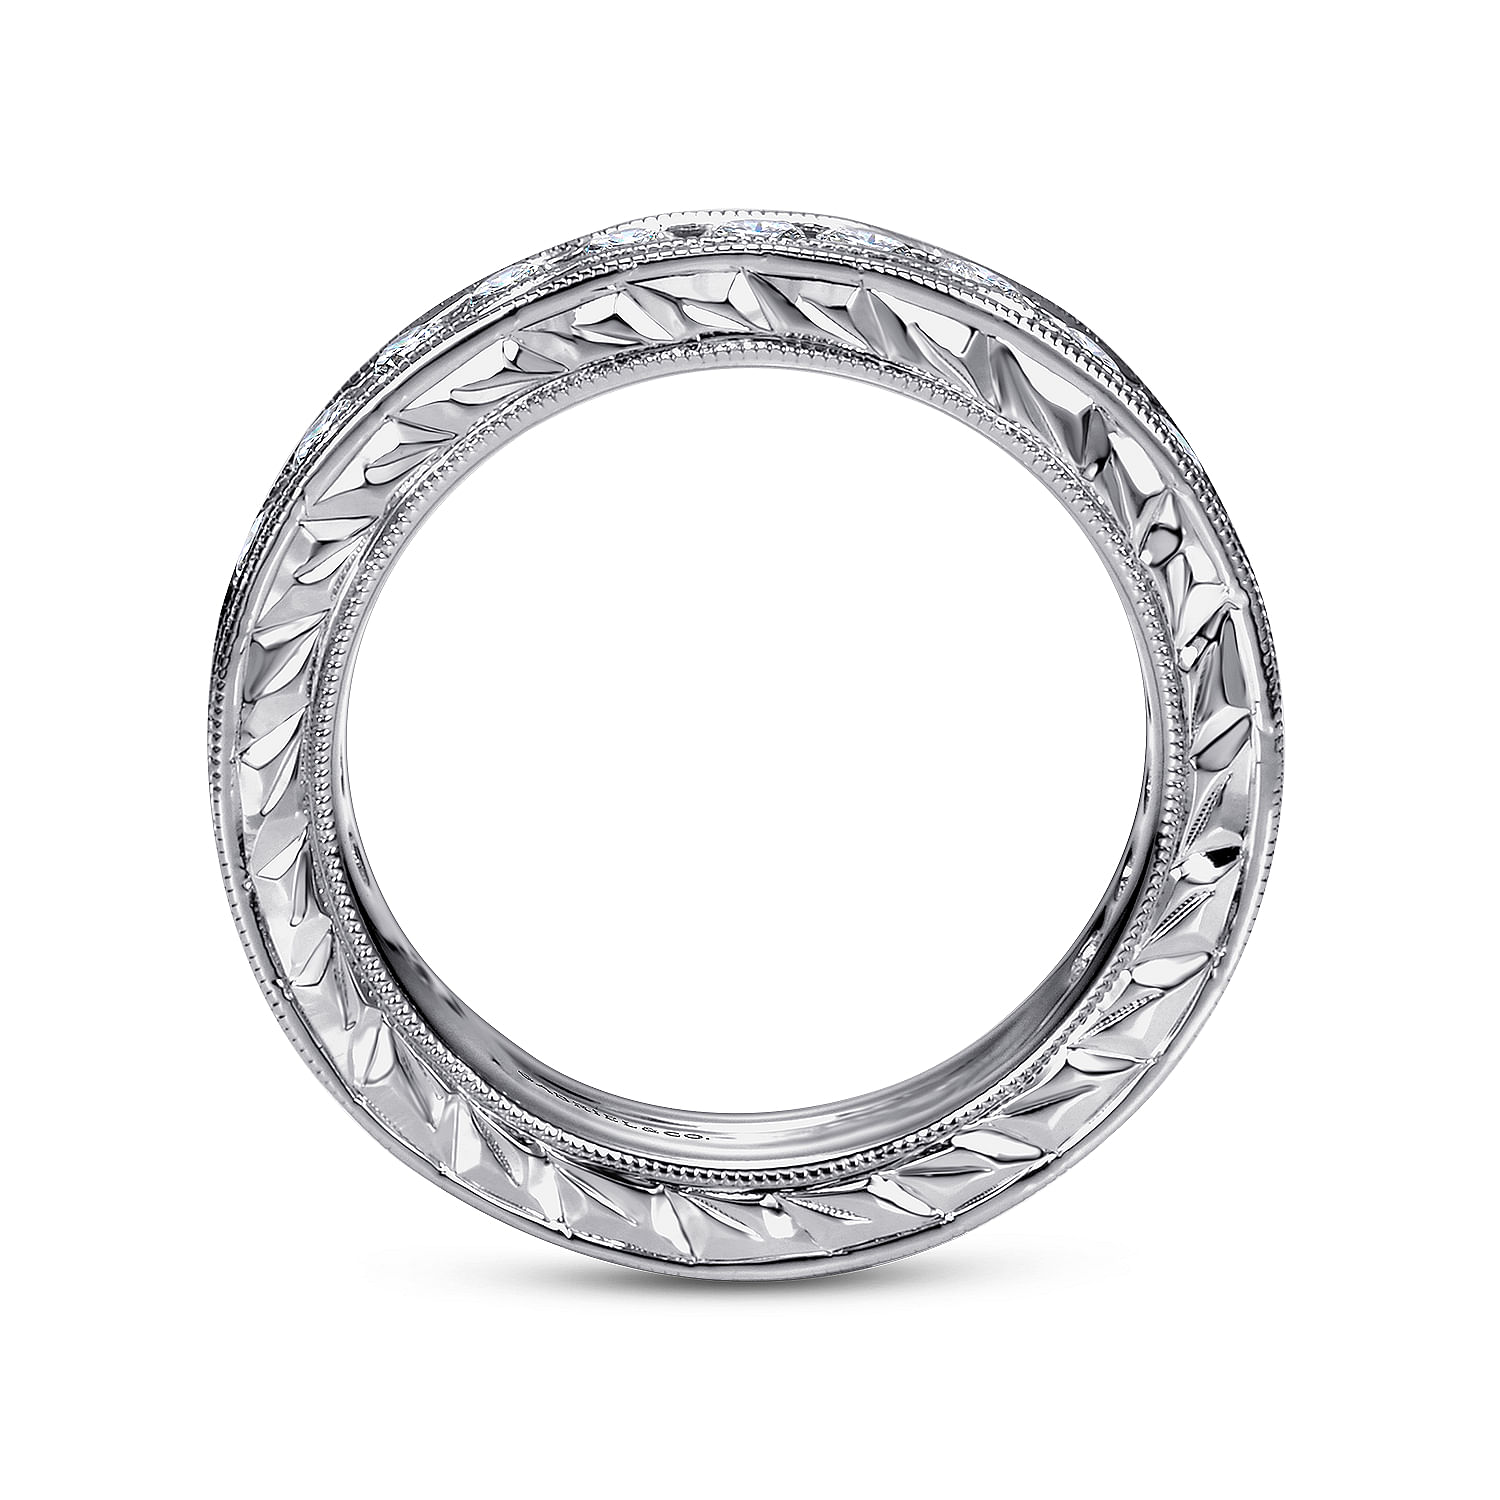 Vintage Inspired 14K White Gold Channel Set Diamond Eternity Band with Engraving